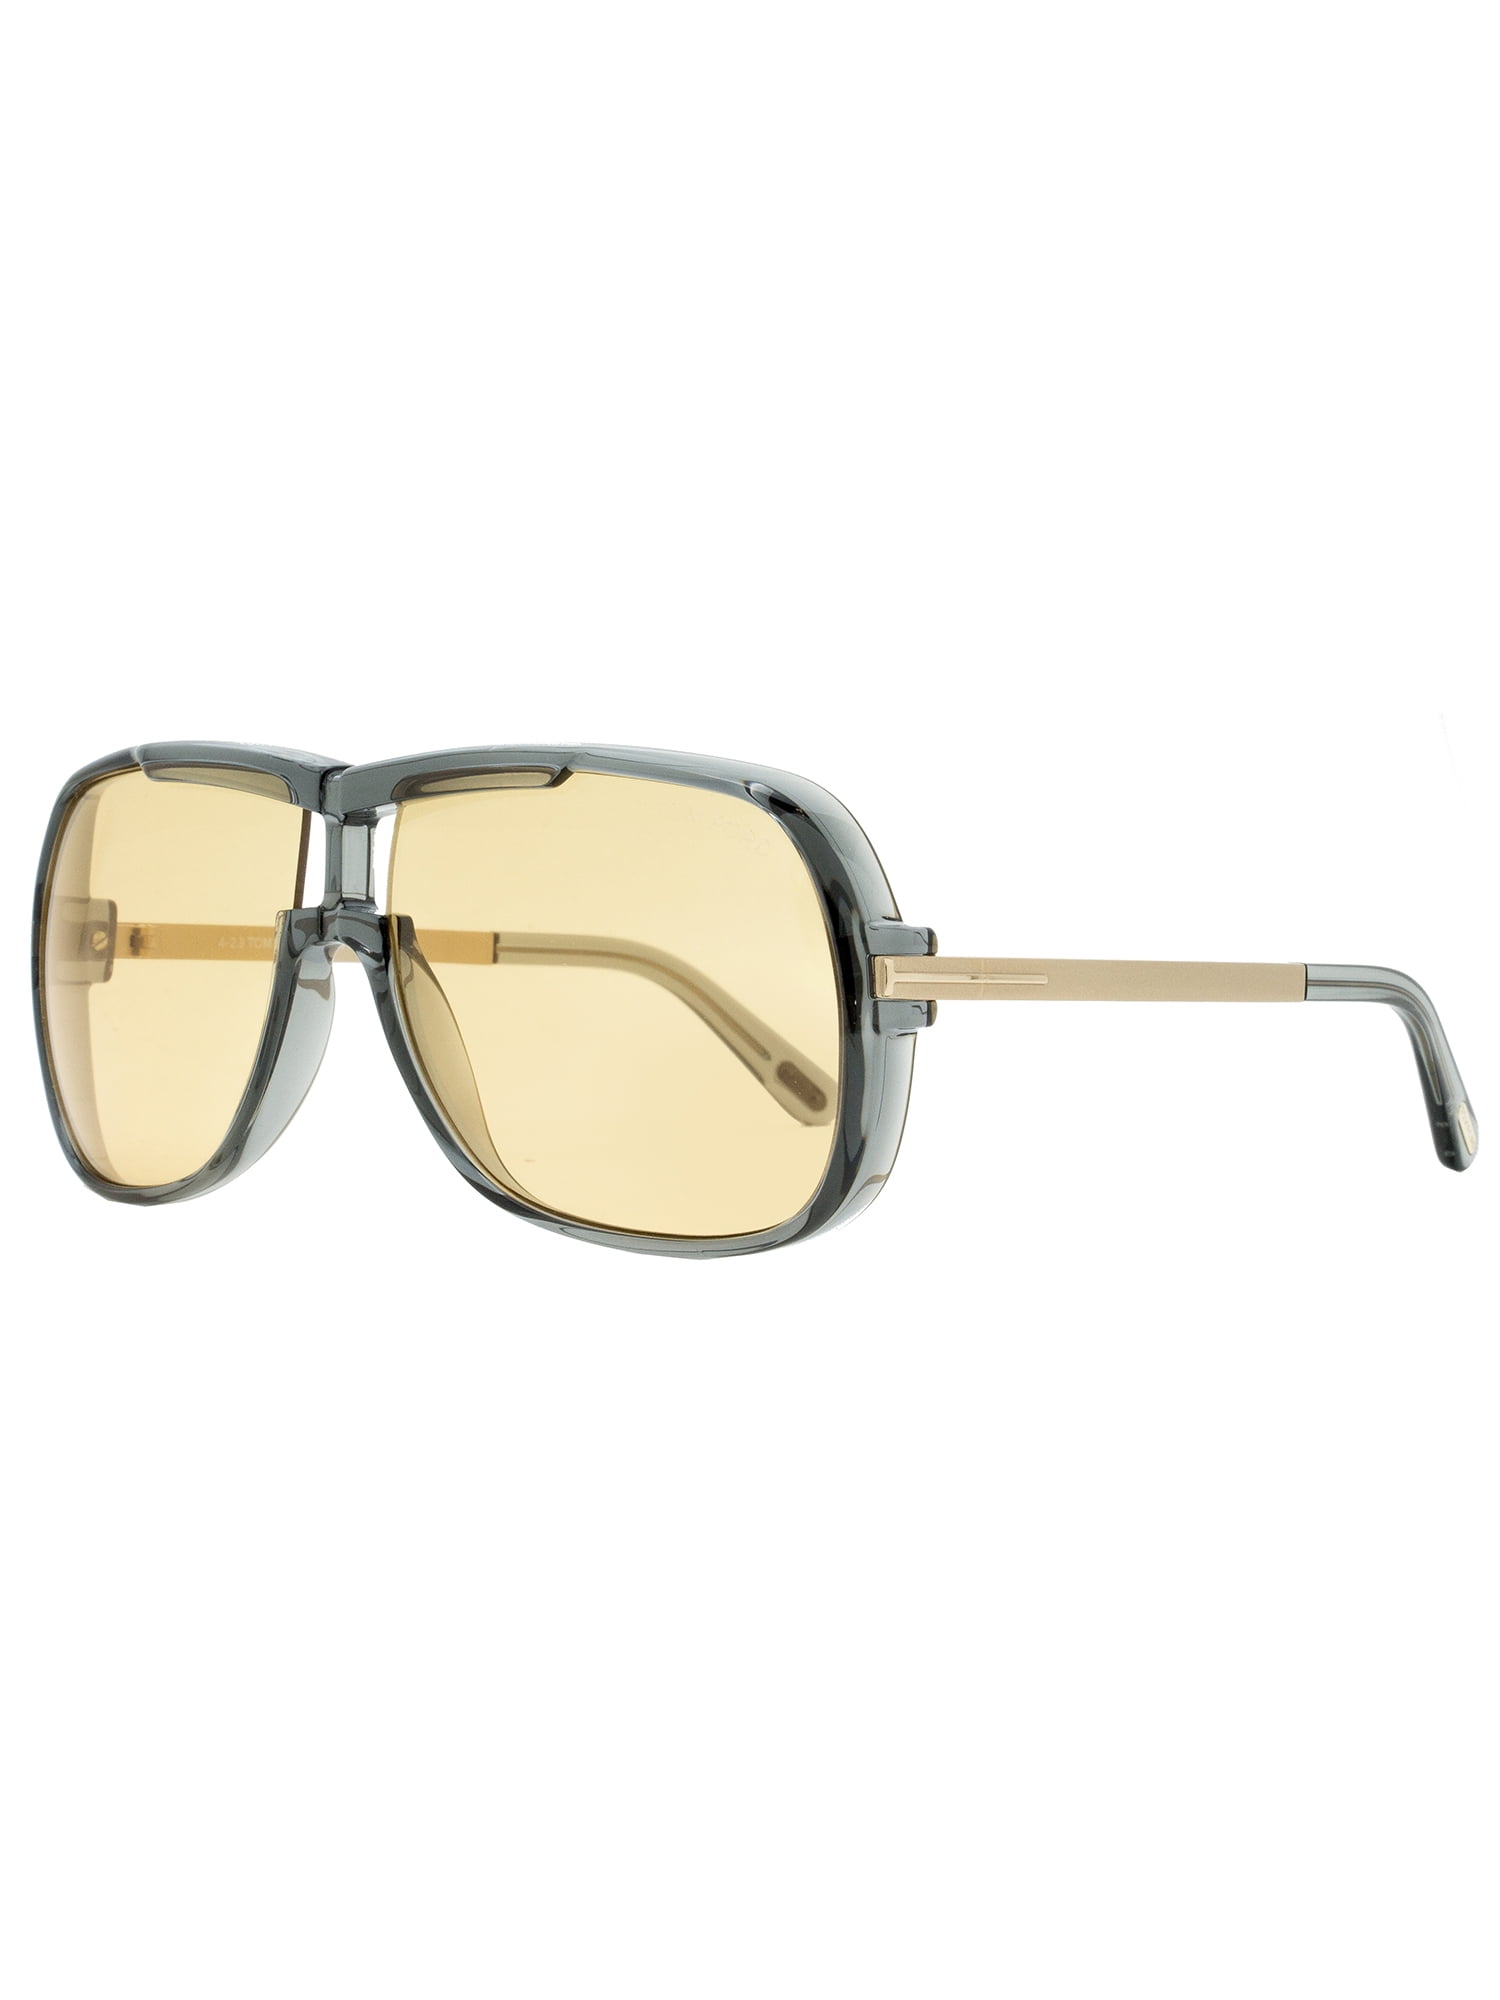 Tom Ford Tom Ford Square Sunglasses Tf800 Caine 20e Graygold 62mm Ft0800 